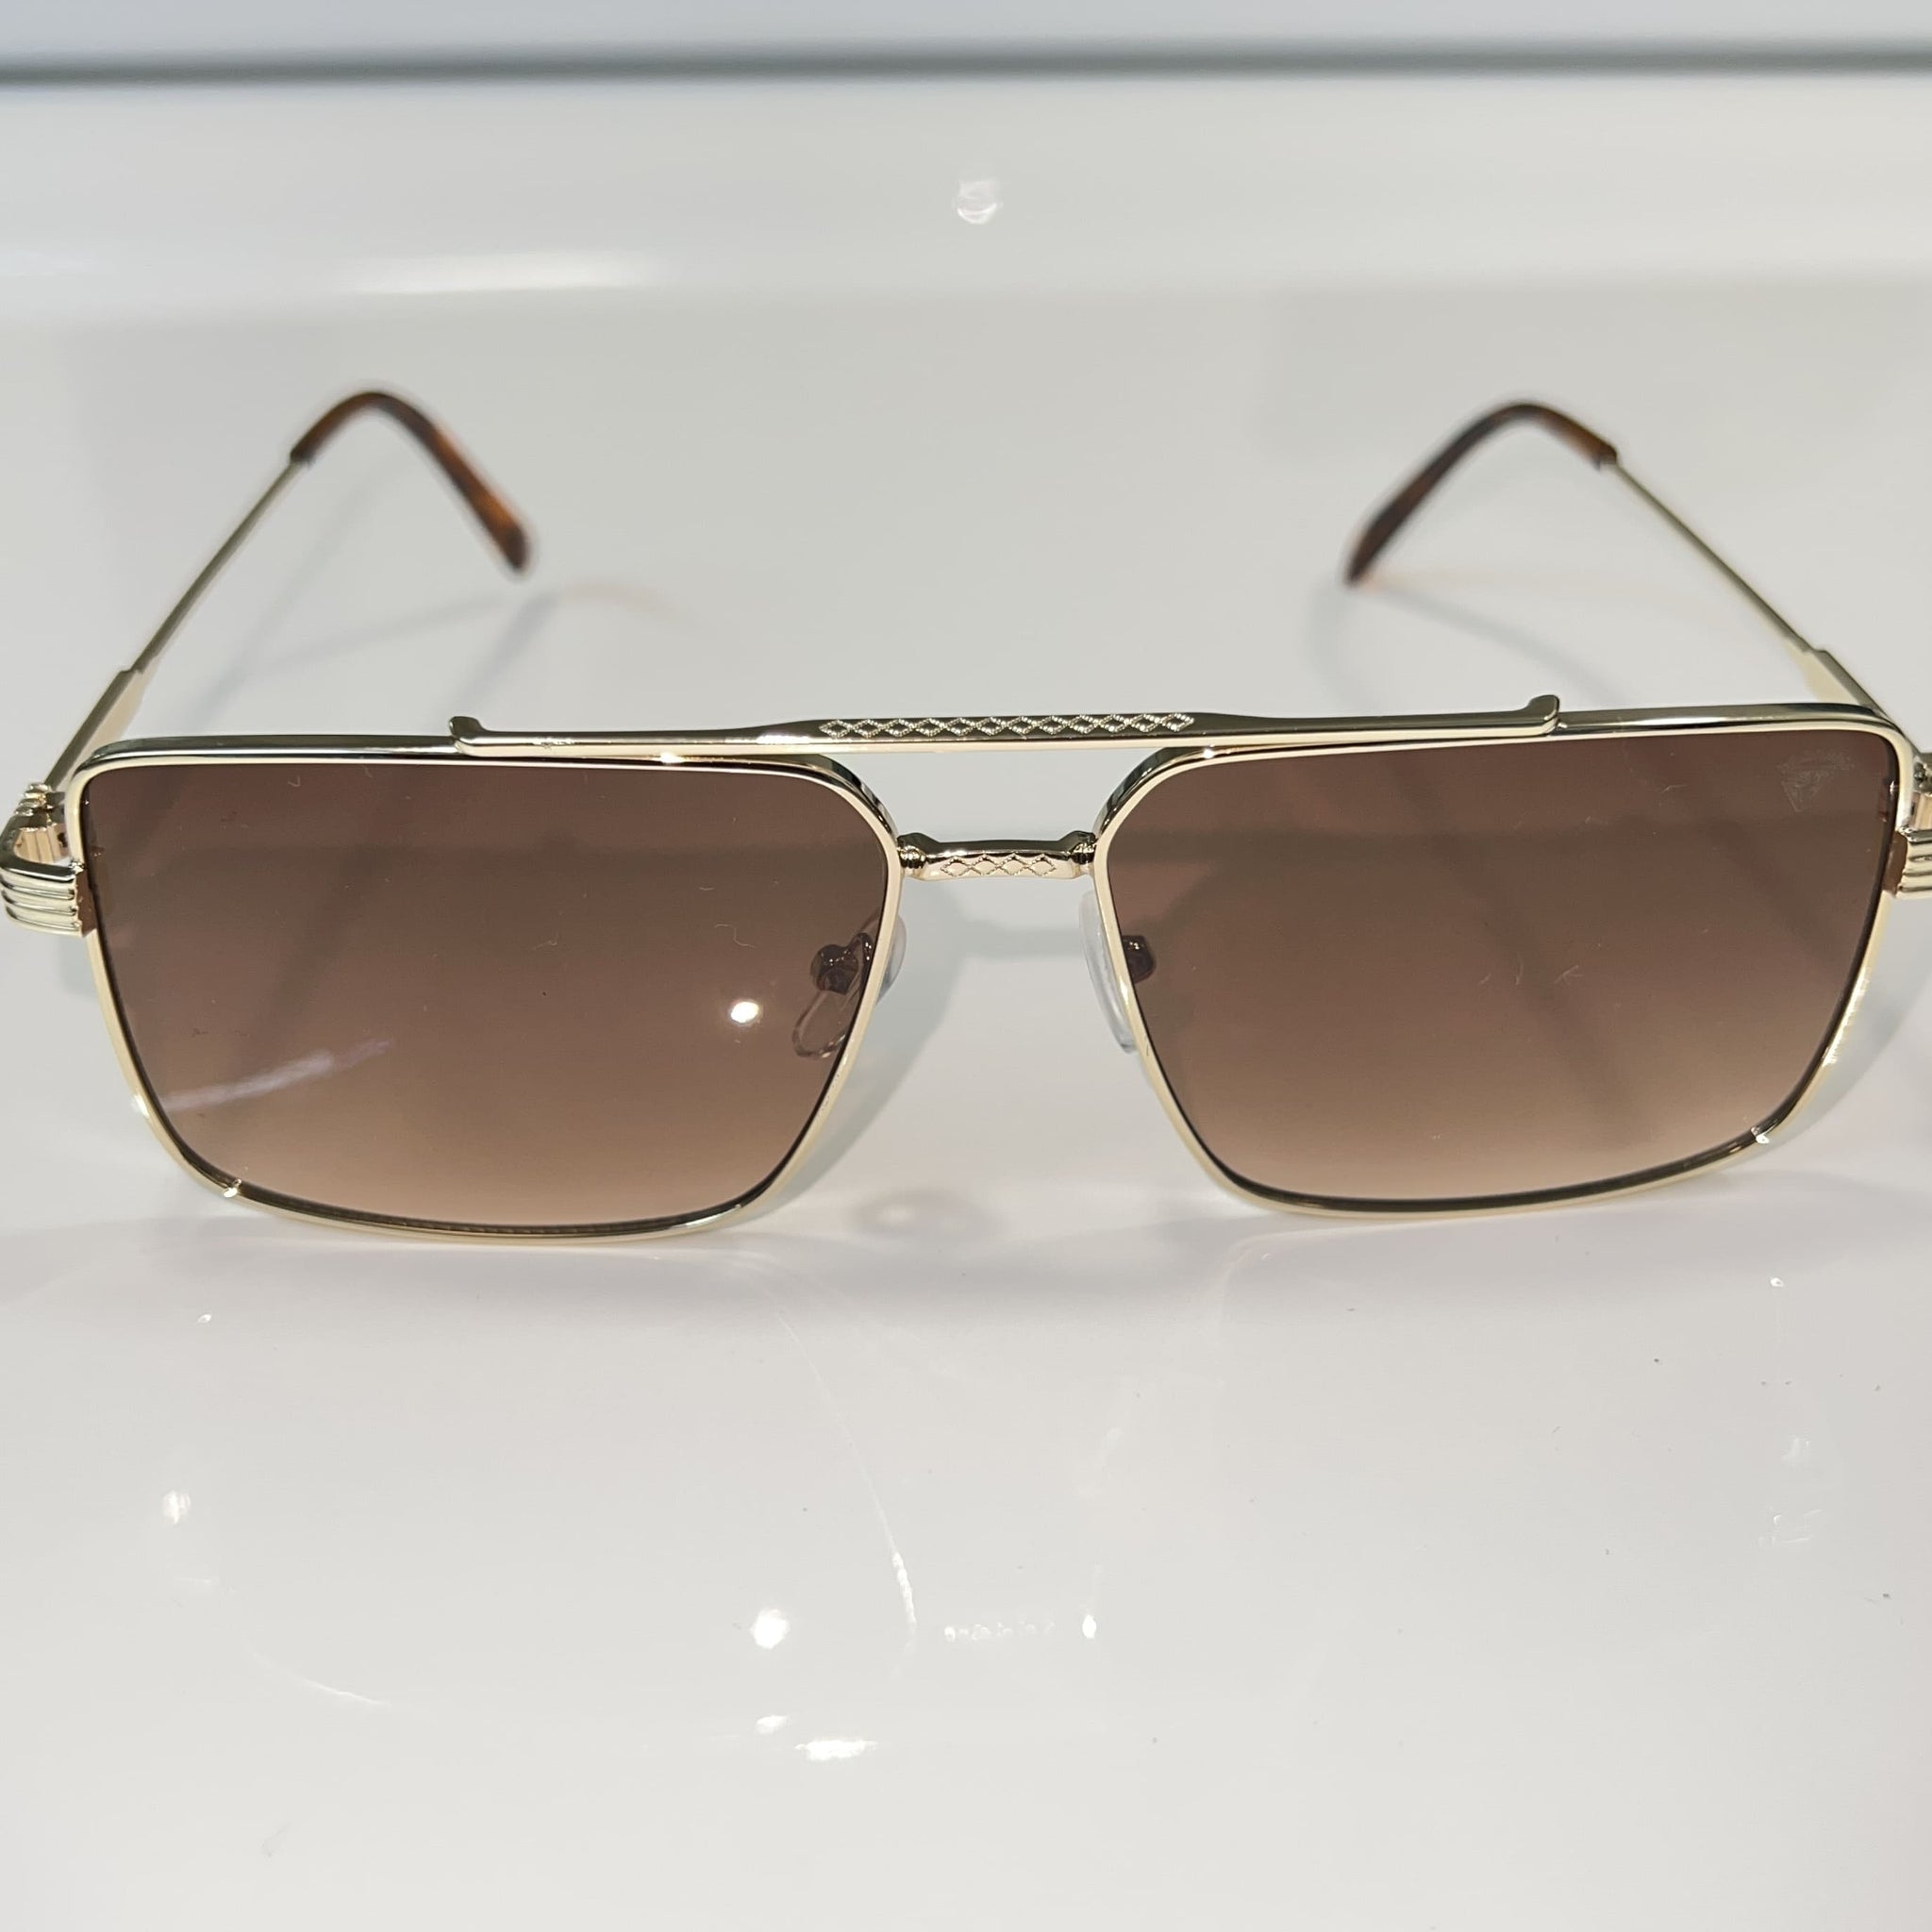 Billionaire Glasses - 14k gold plated - Brown Shade - Sehgal Glasses